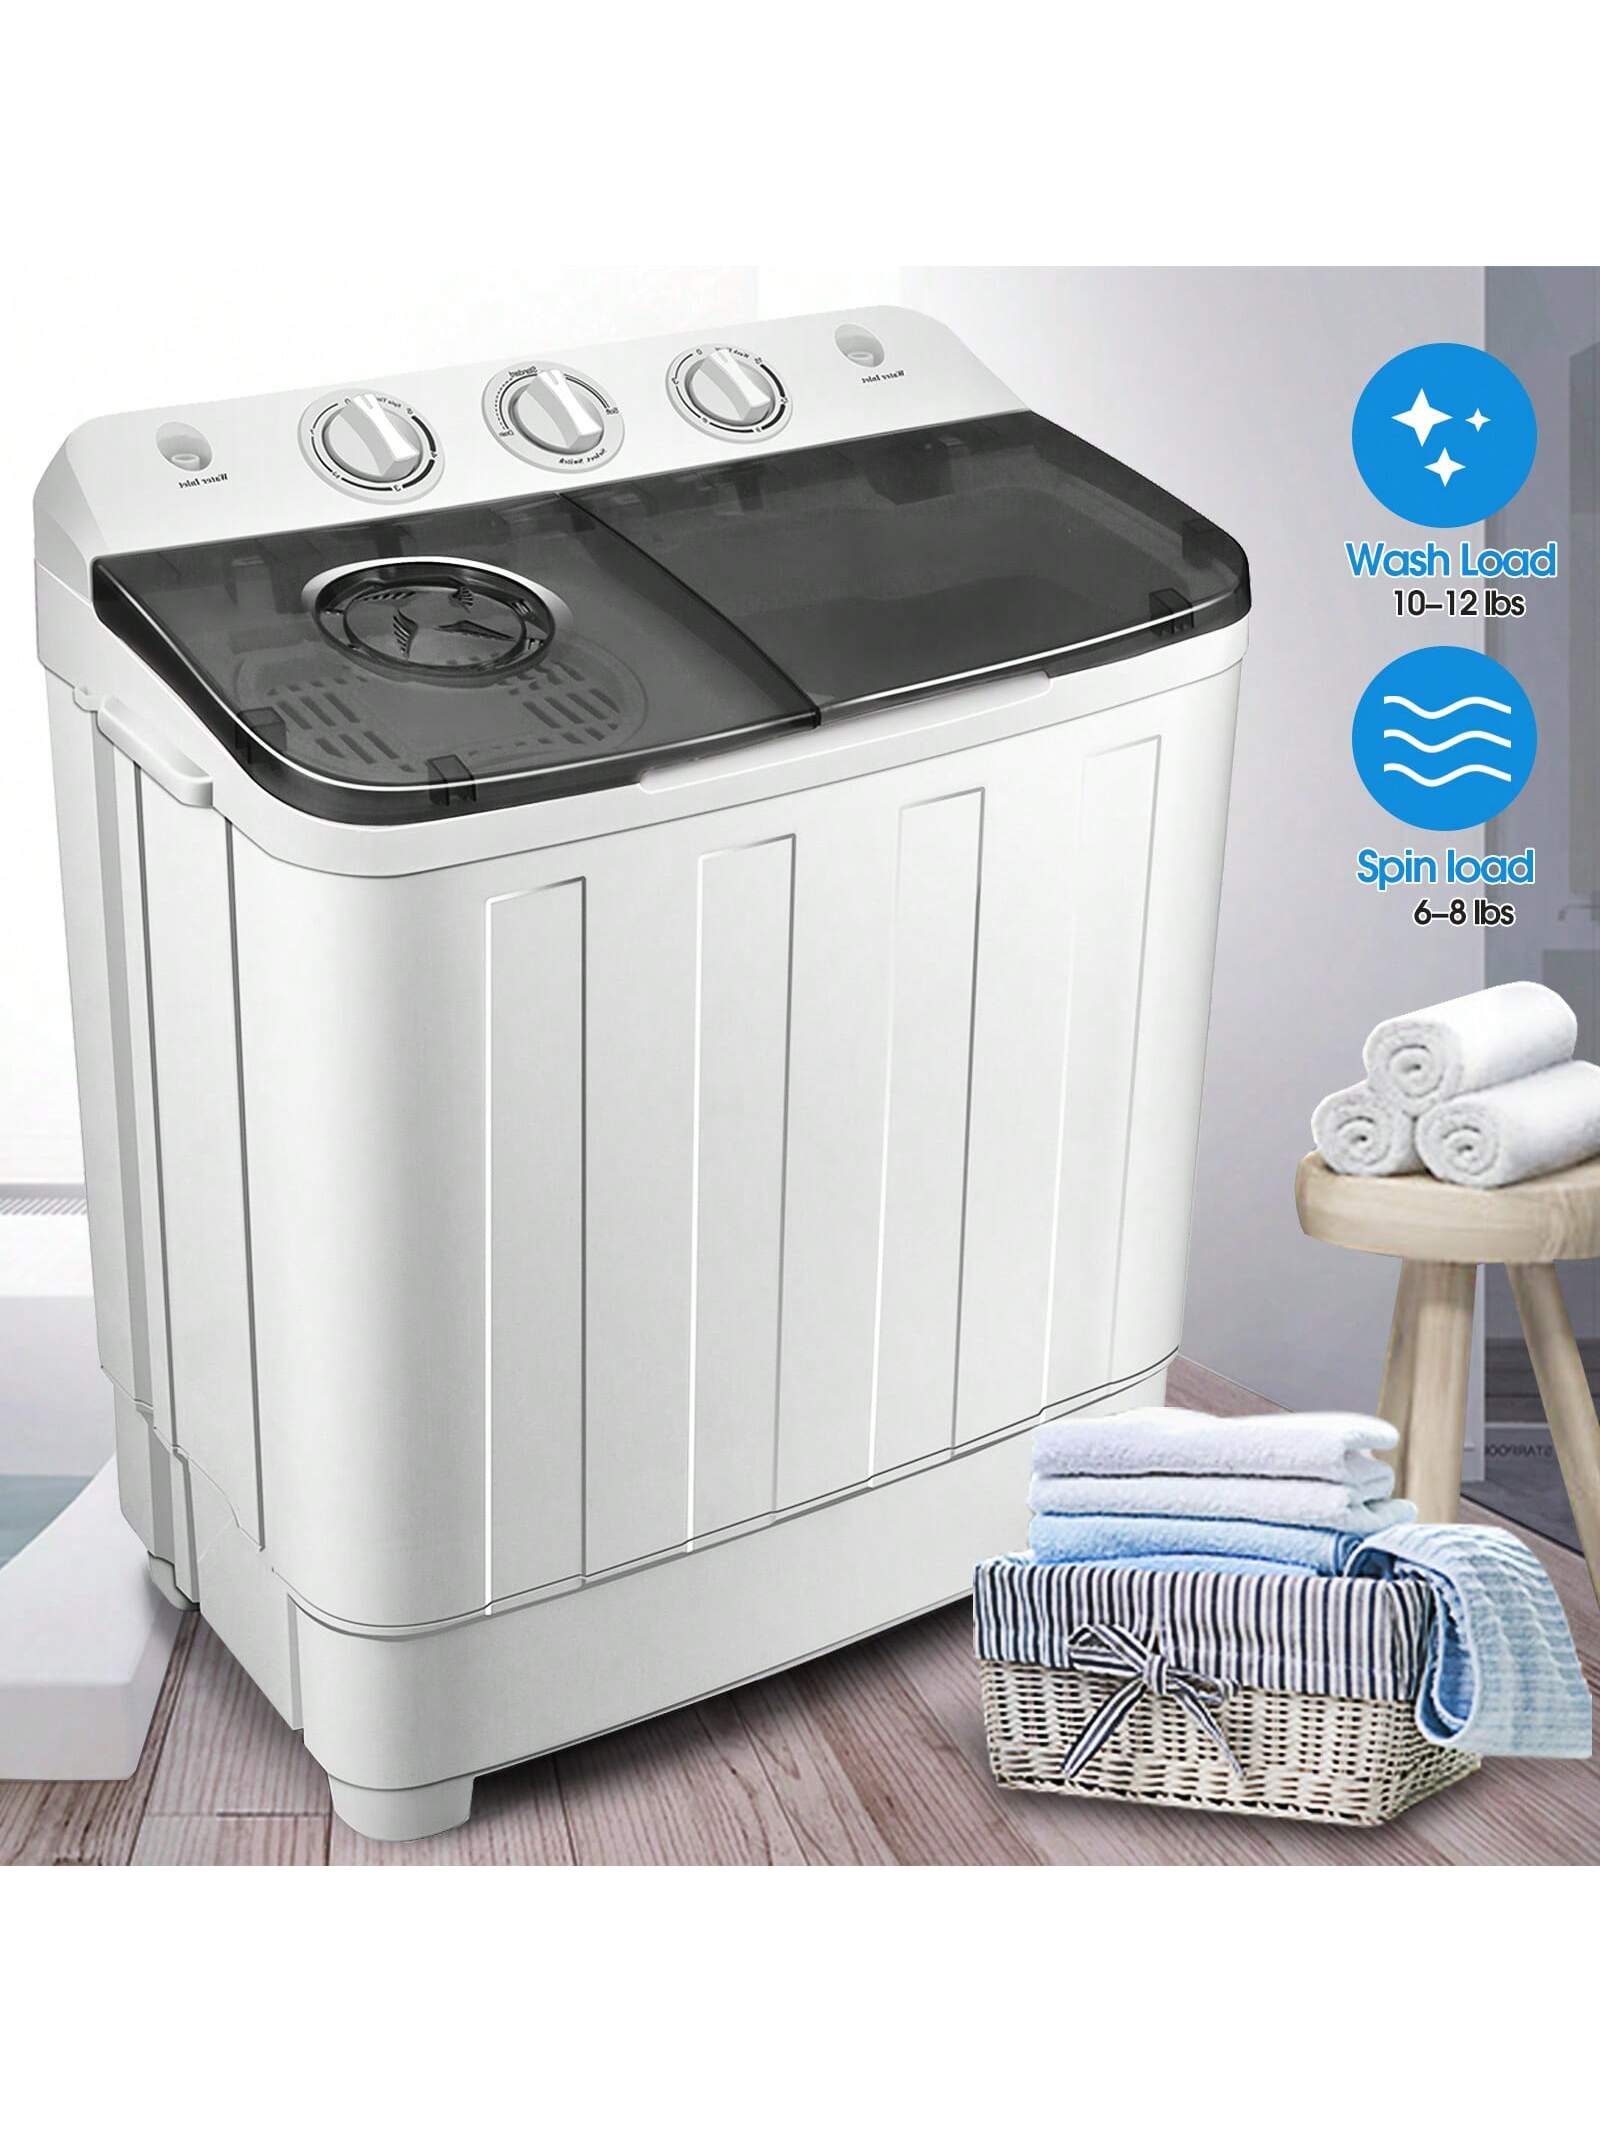 Gymax Portable Washing Machine Compact Twin Tub 20 lbs Capacity Washer Spinner